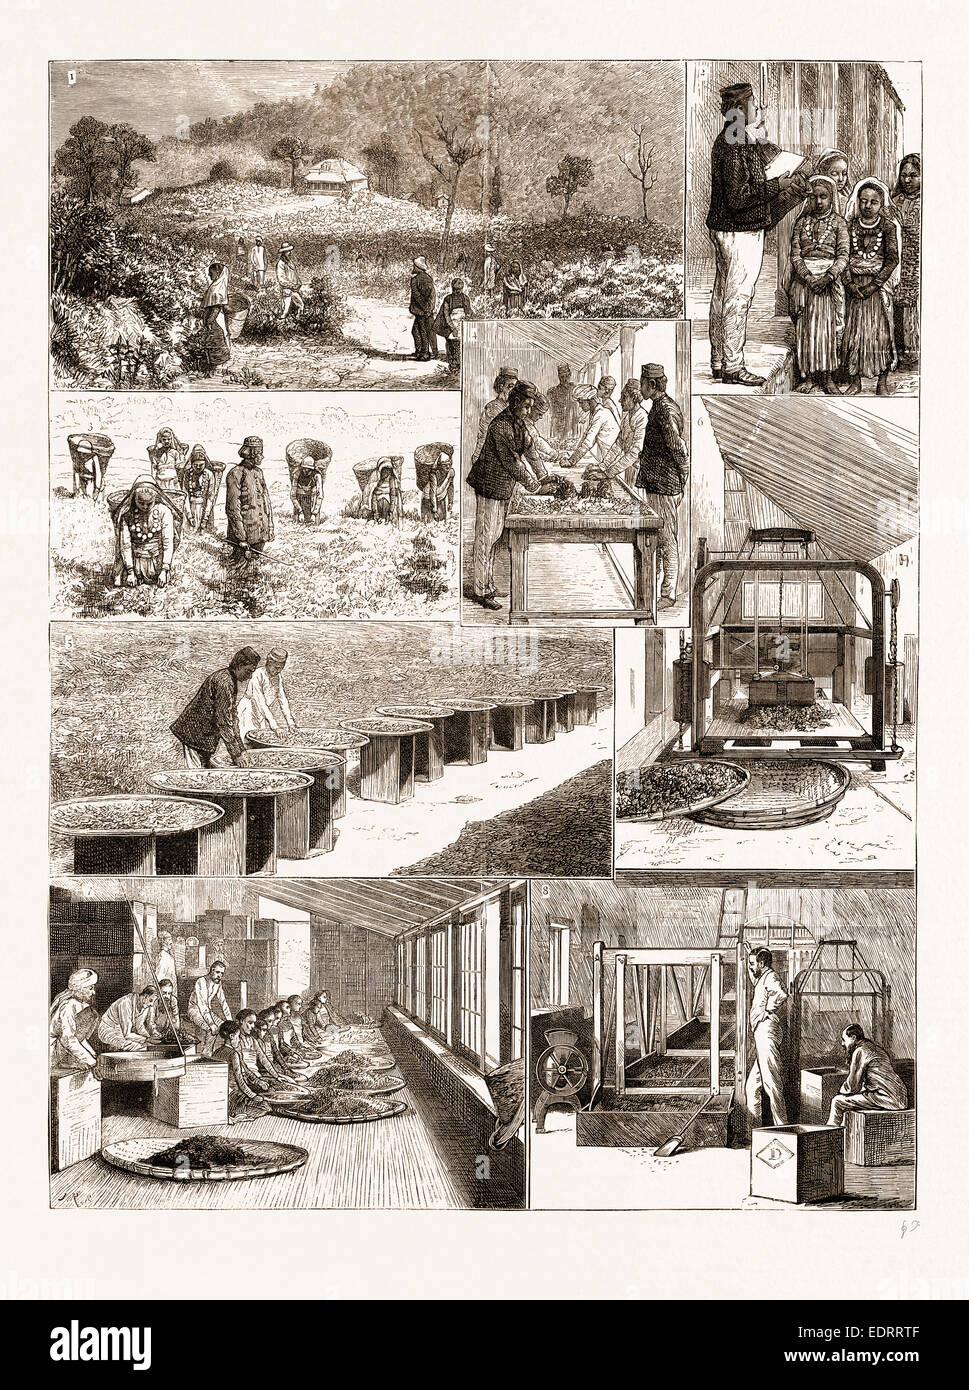 TEA CULTIVATION IN BRITISH INDIA, 1876: 1. Ging Tea Plantation, Darjeeling. 2. Weighing the Leaf. 3. Plucking the Leaf Stock Photo